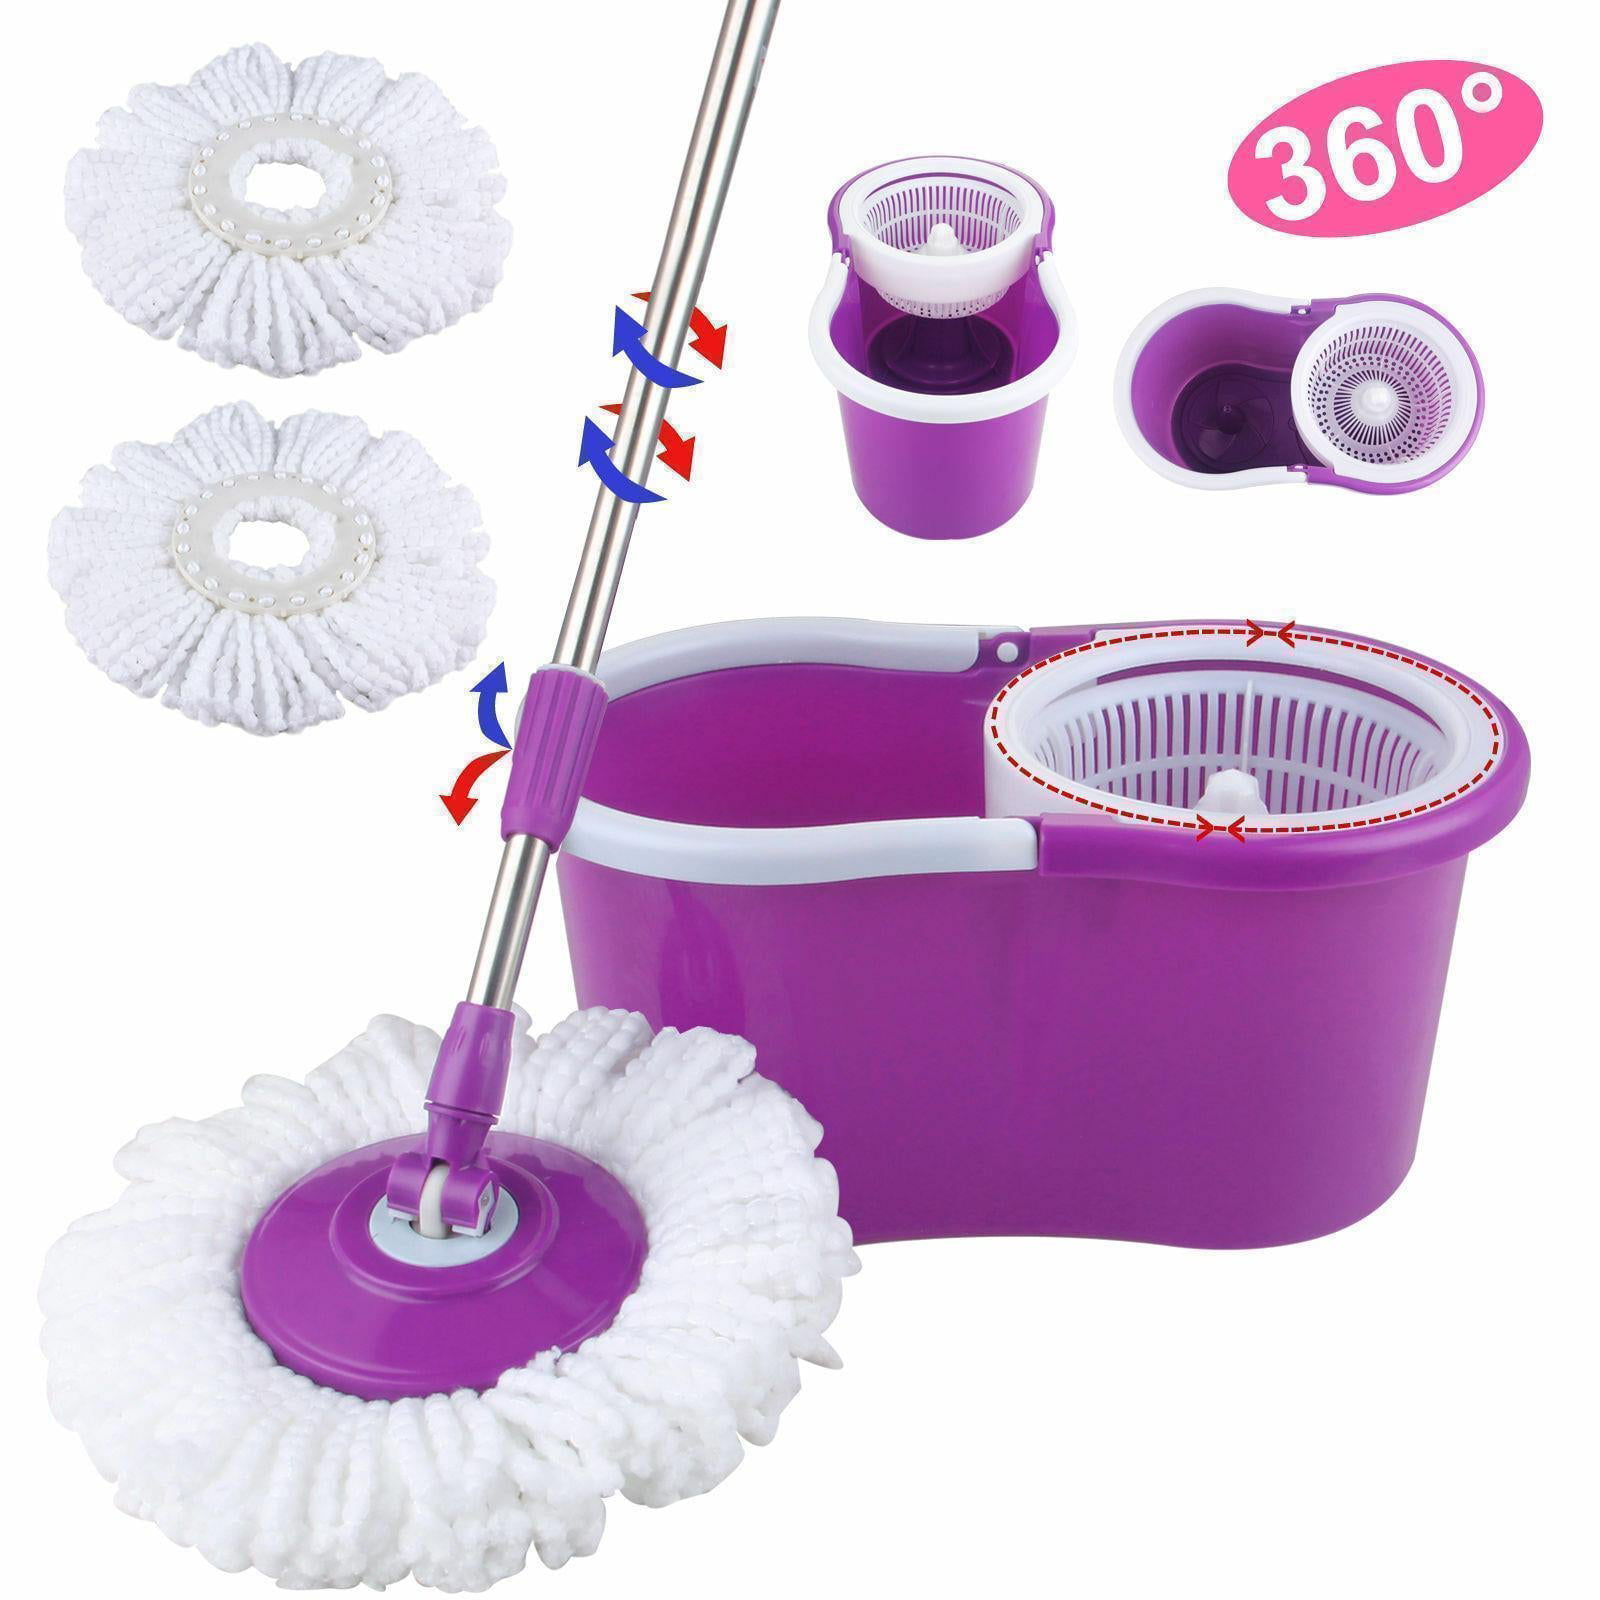 2 pc Spin Mop Replace for MicroMagic Floor Mop 360° Bucket 2 Rotating Spin Heads 